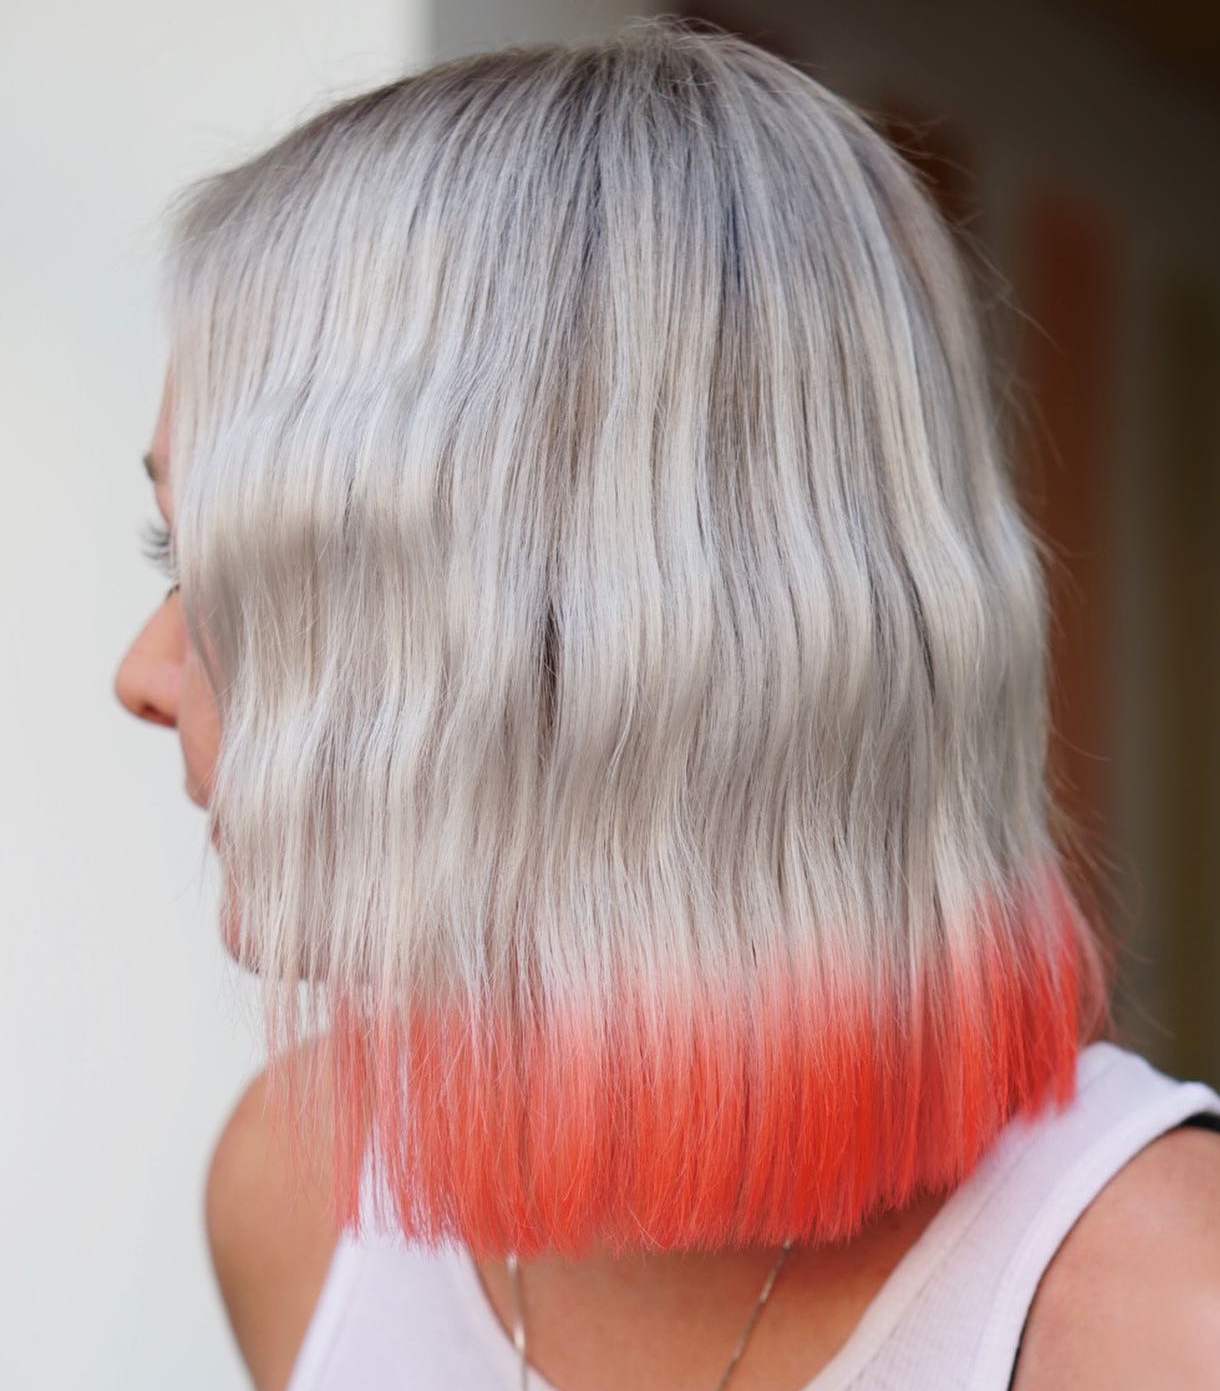 Silver to Red Ombre on Bob Haircut